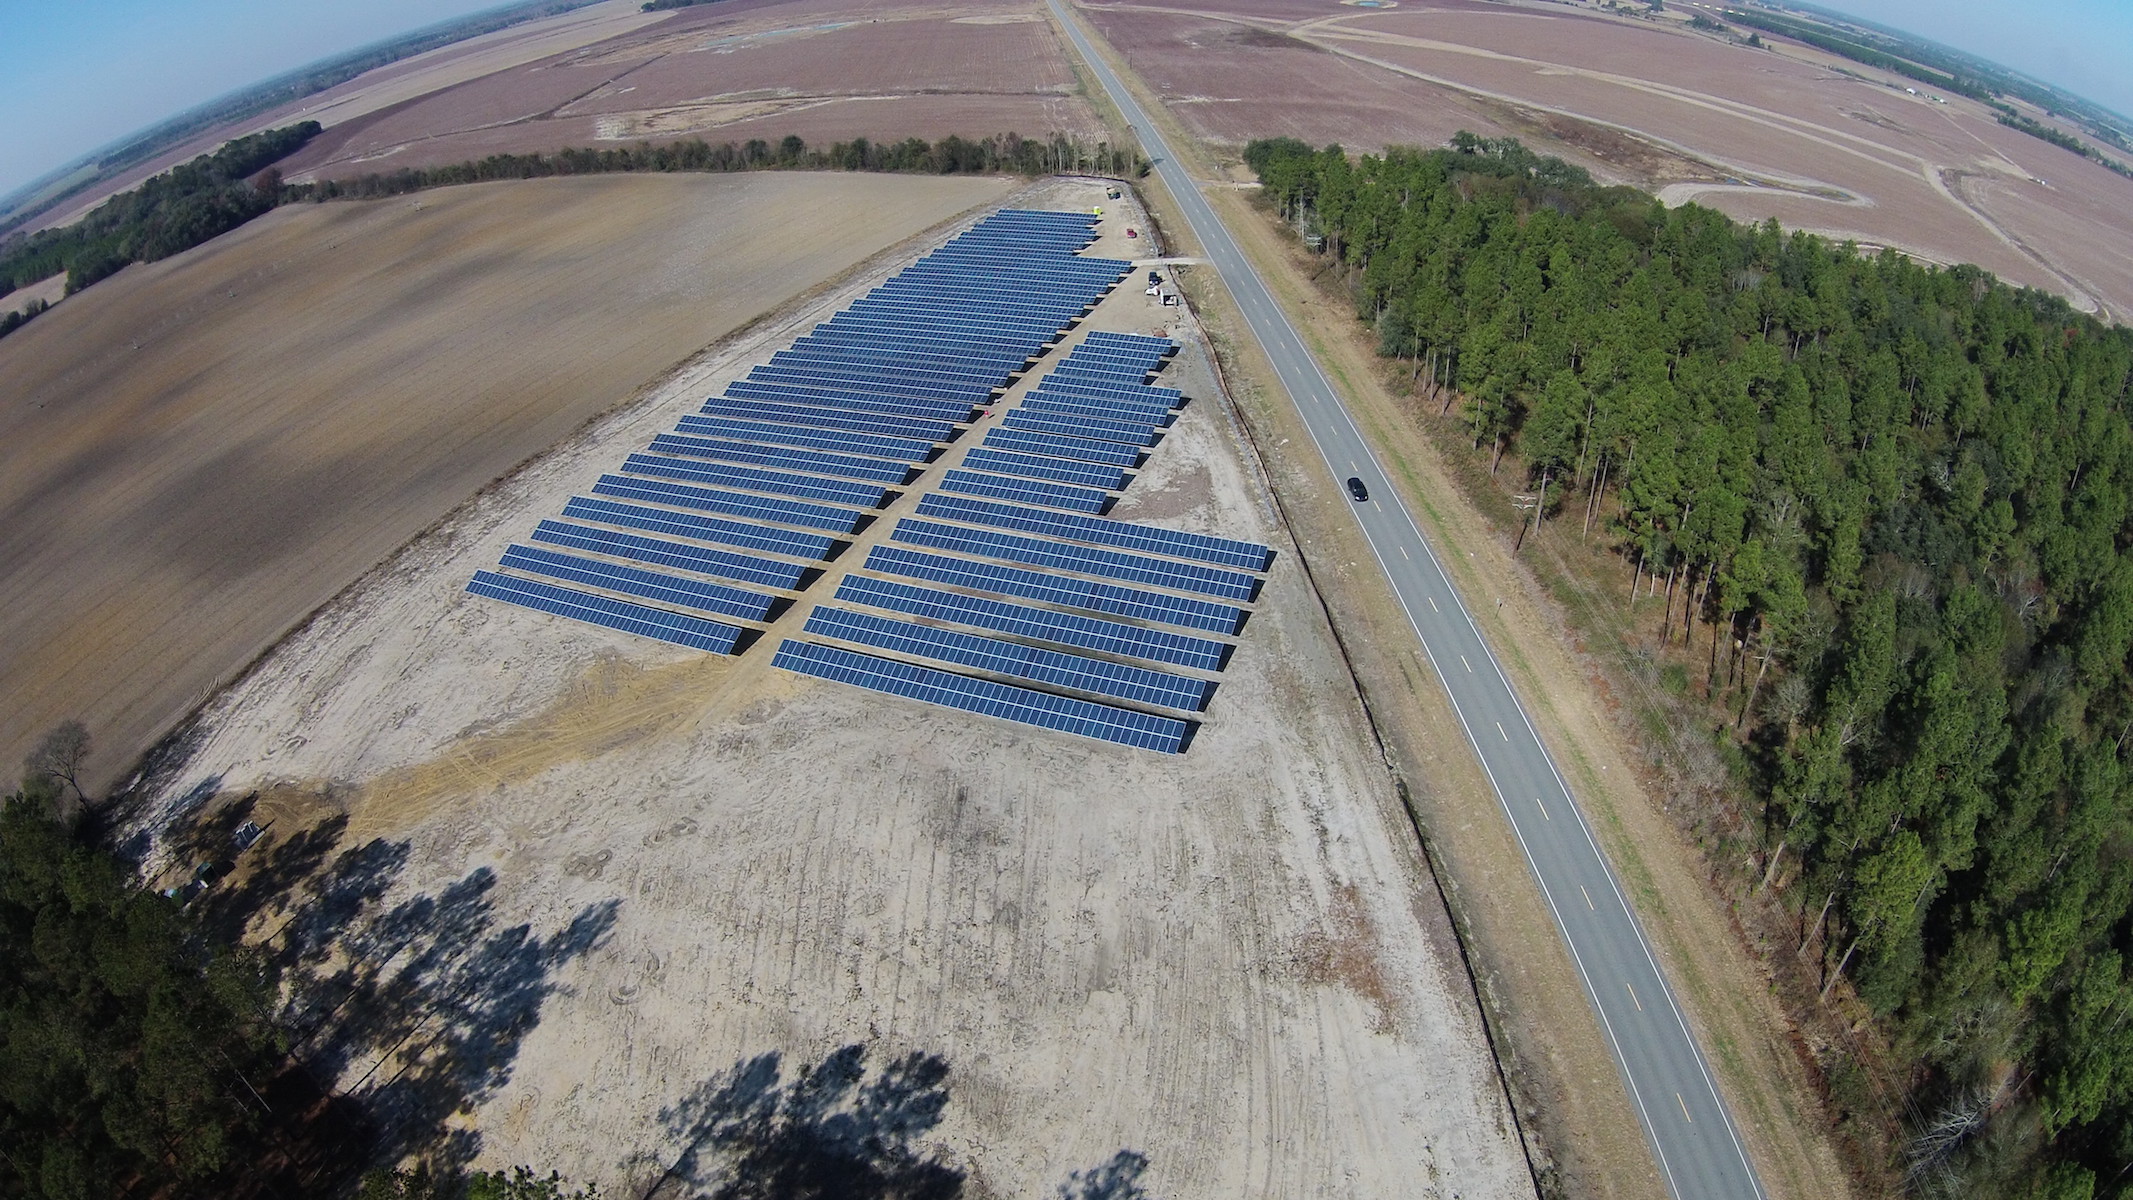 APGG selected Renewvia to engineer, design, procure and construct their most recent and largest solar project to date.